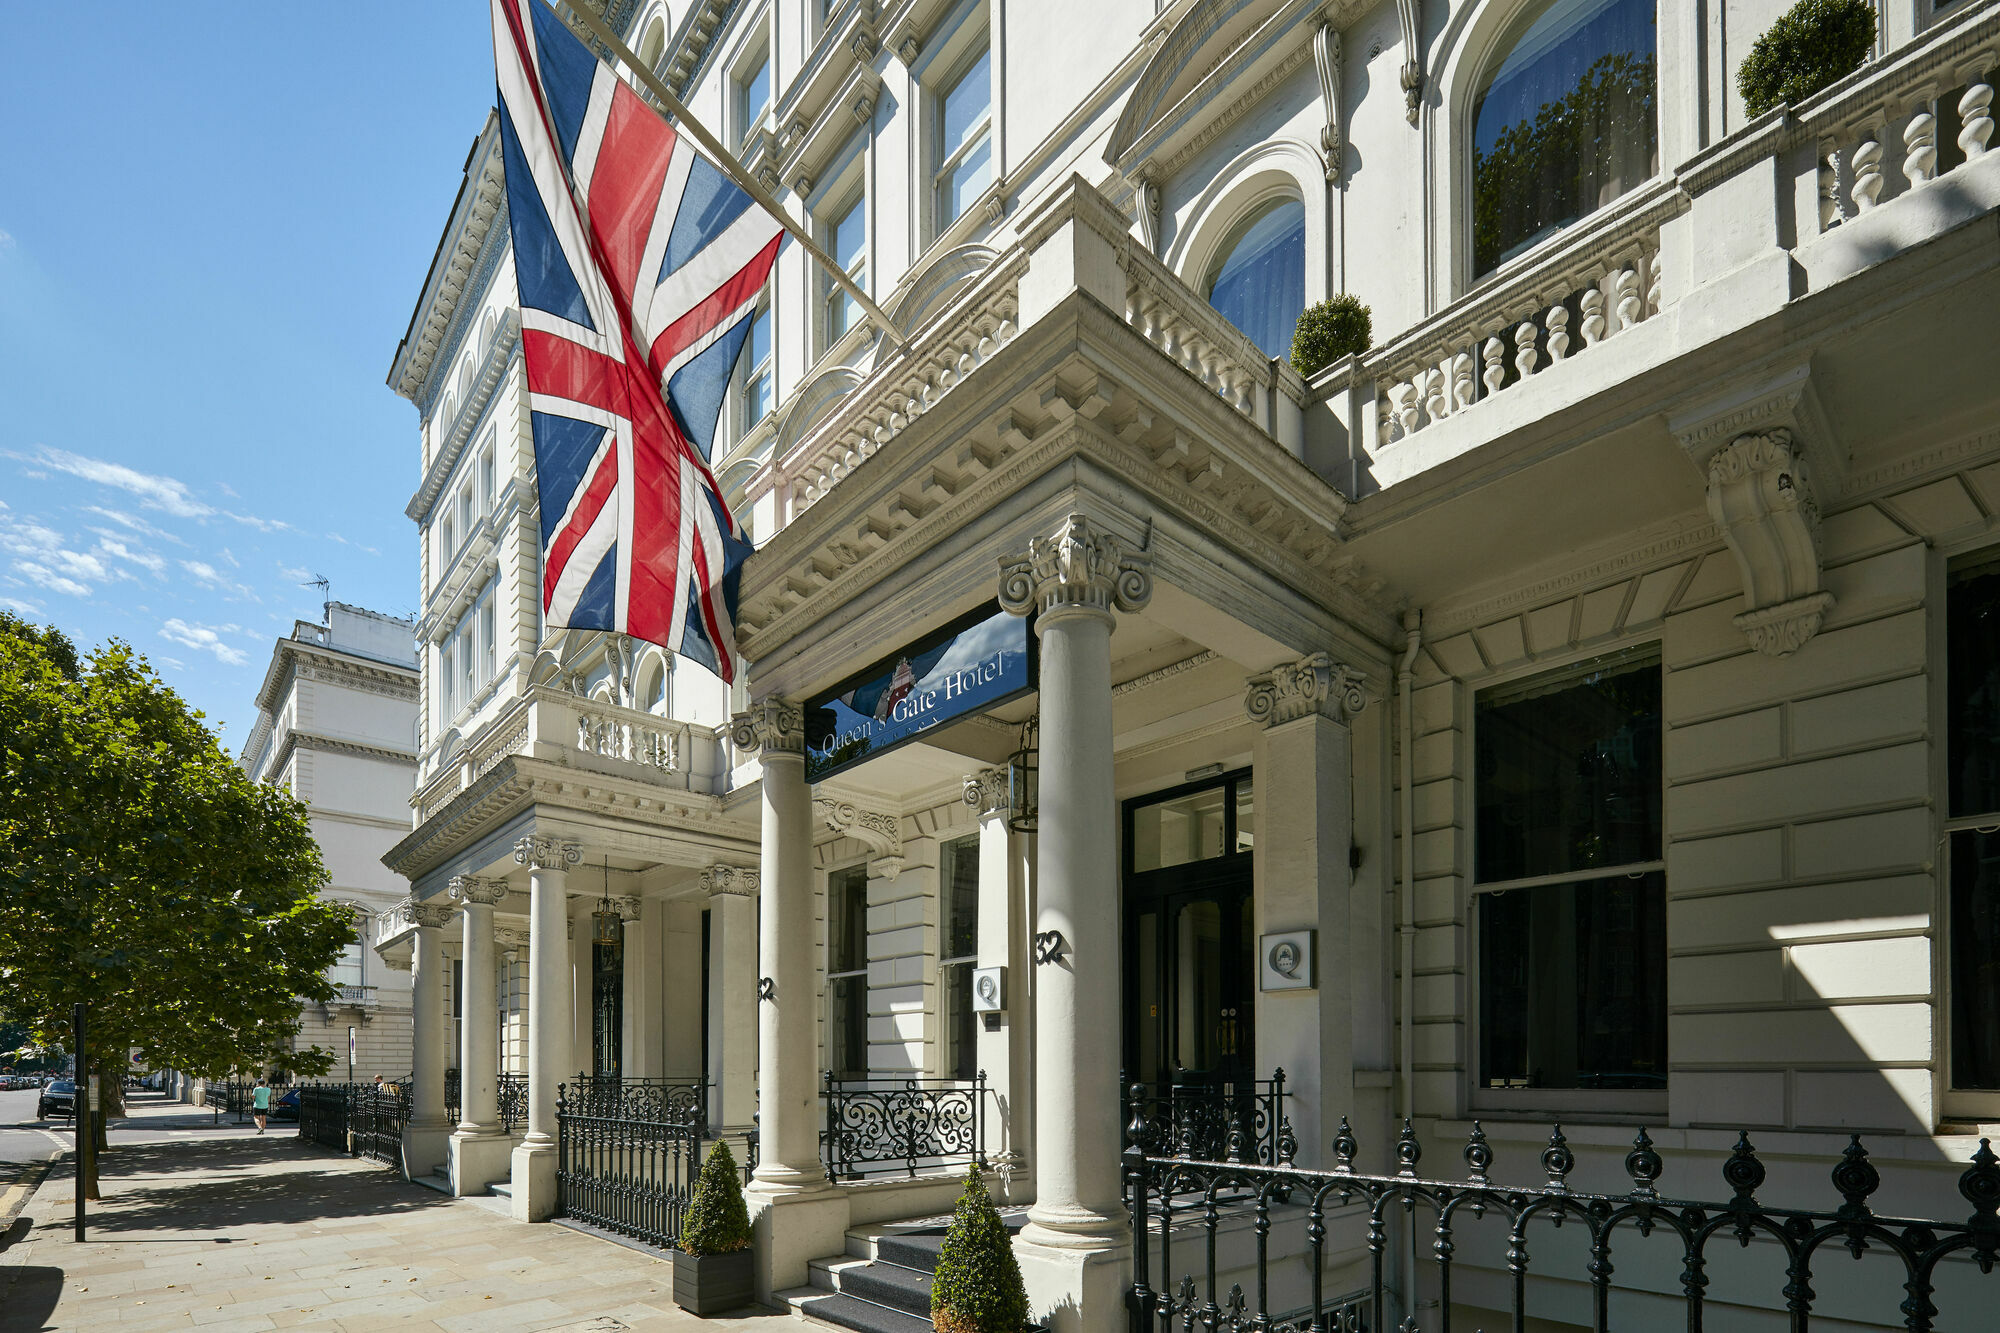 The Queens Gate Hotel London Exterior foto